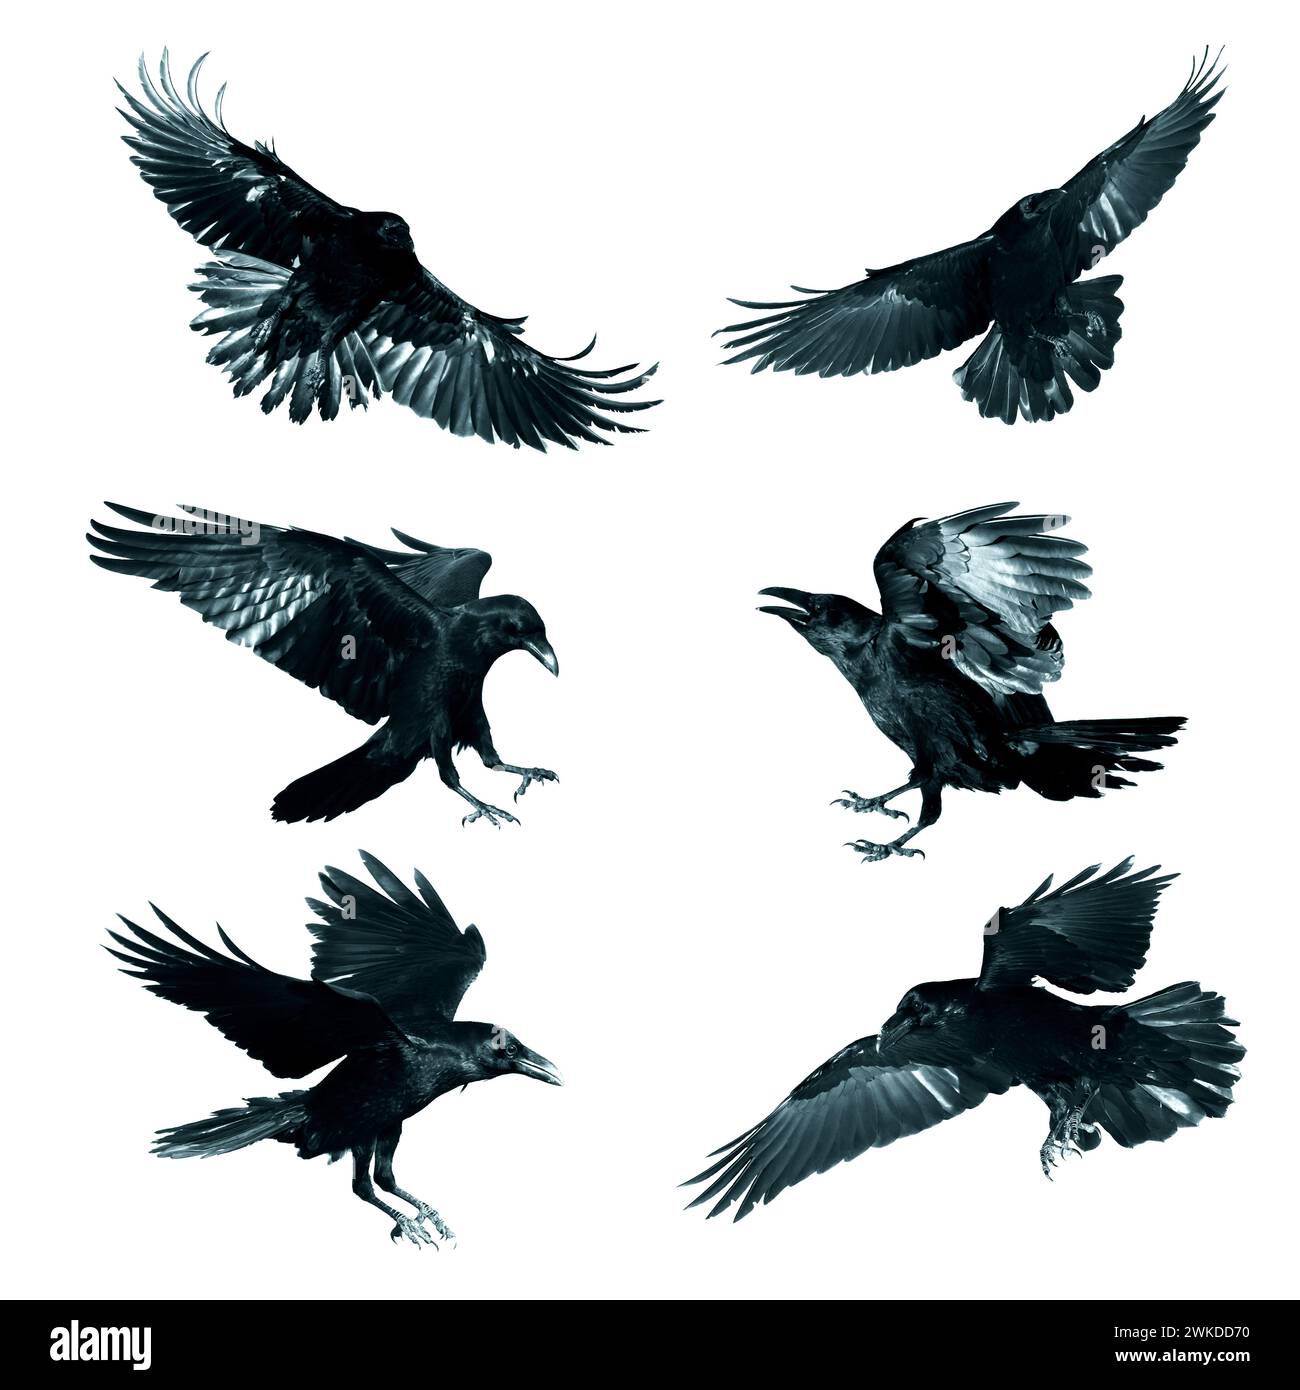 Birds flying ravens isolated on white background Corvus corax. Halloween - mix six birds, silhouette of a large black bird in flight Stock Photo